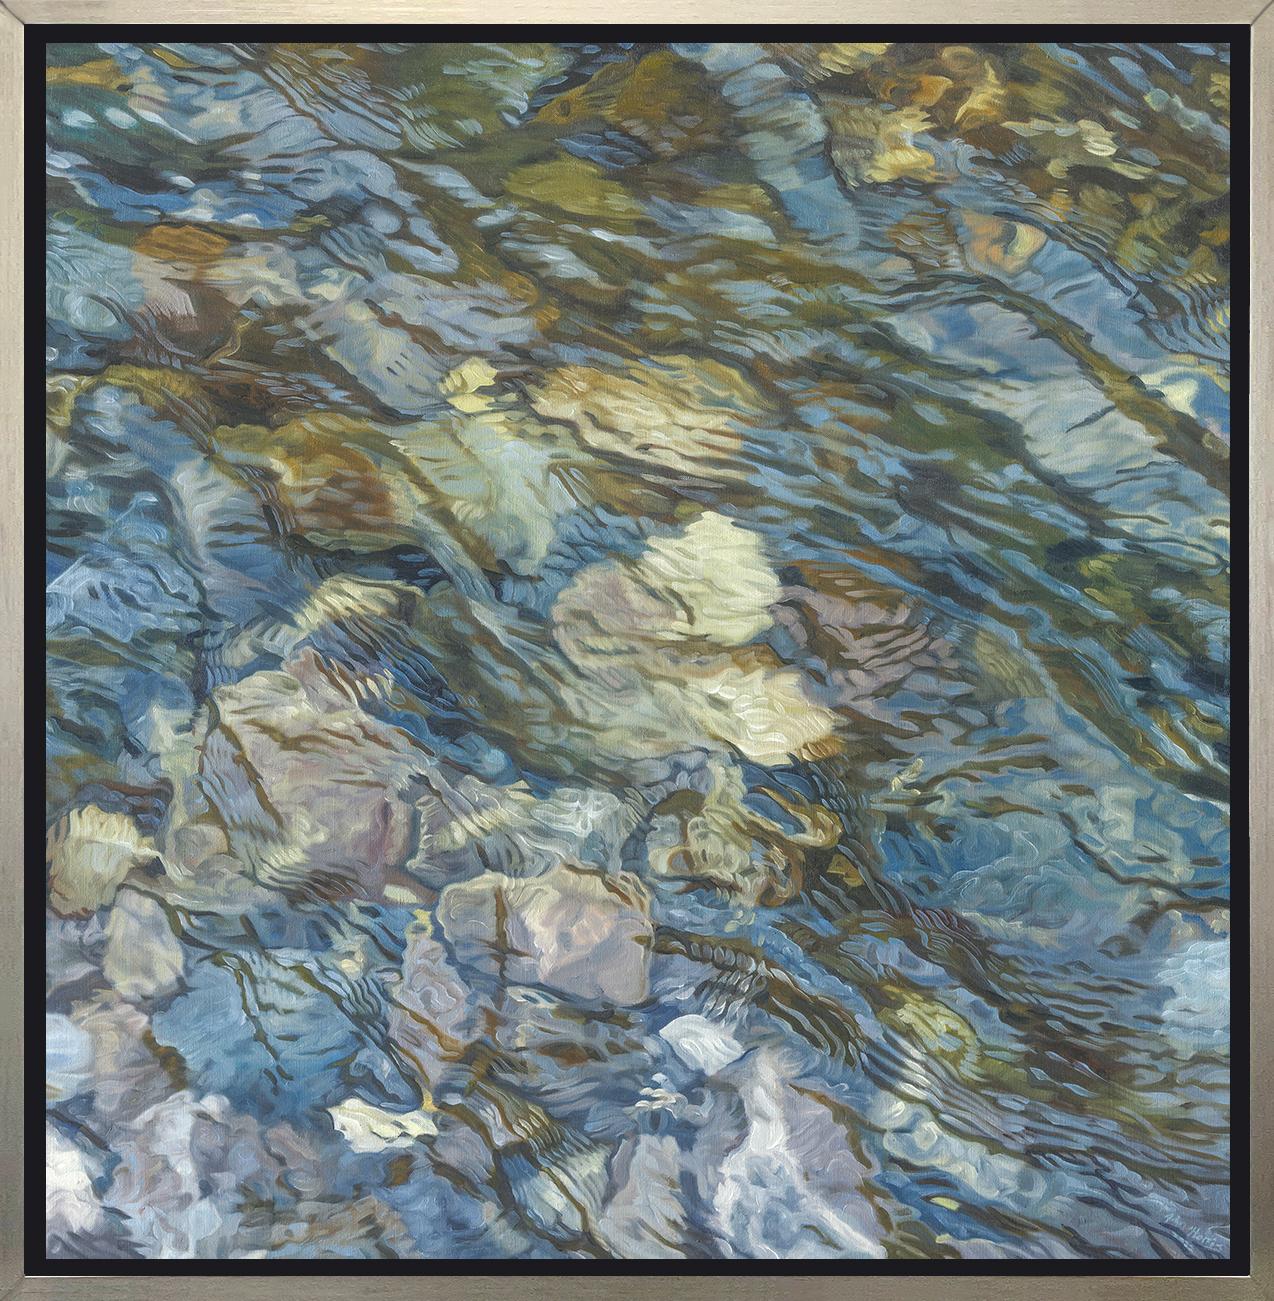 "Riverbed 4, " Framed Limited Edition Giclee Print, 30" x 30"